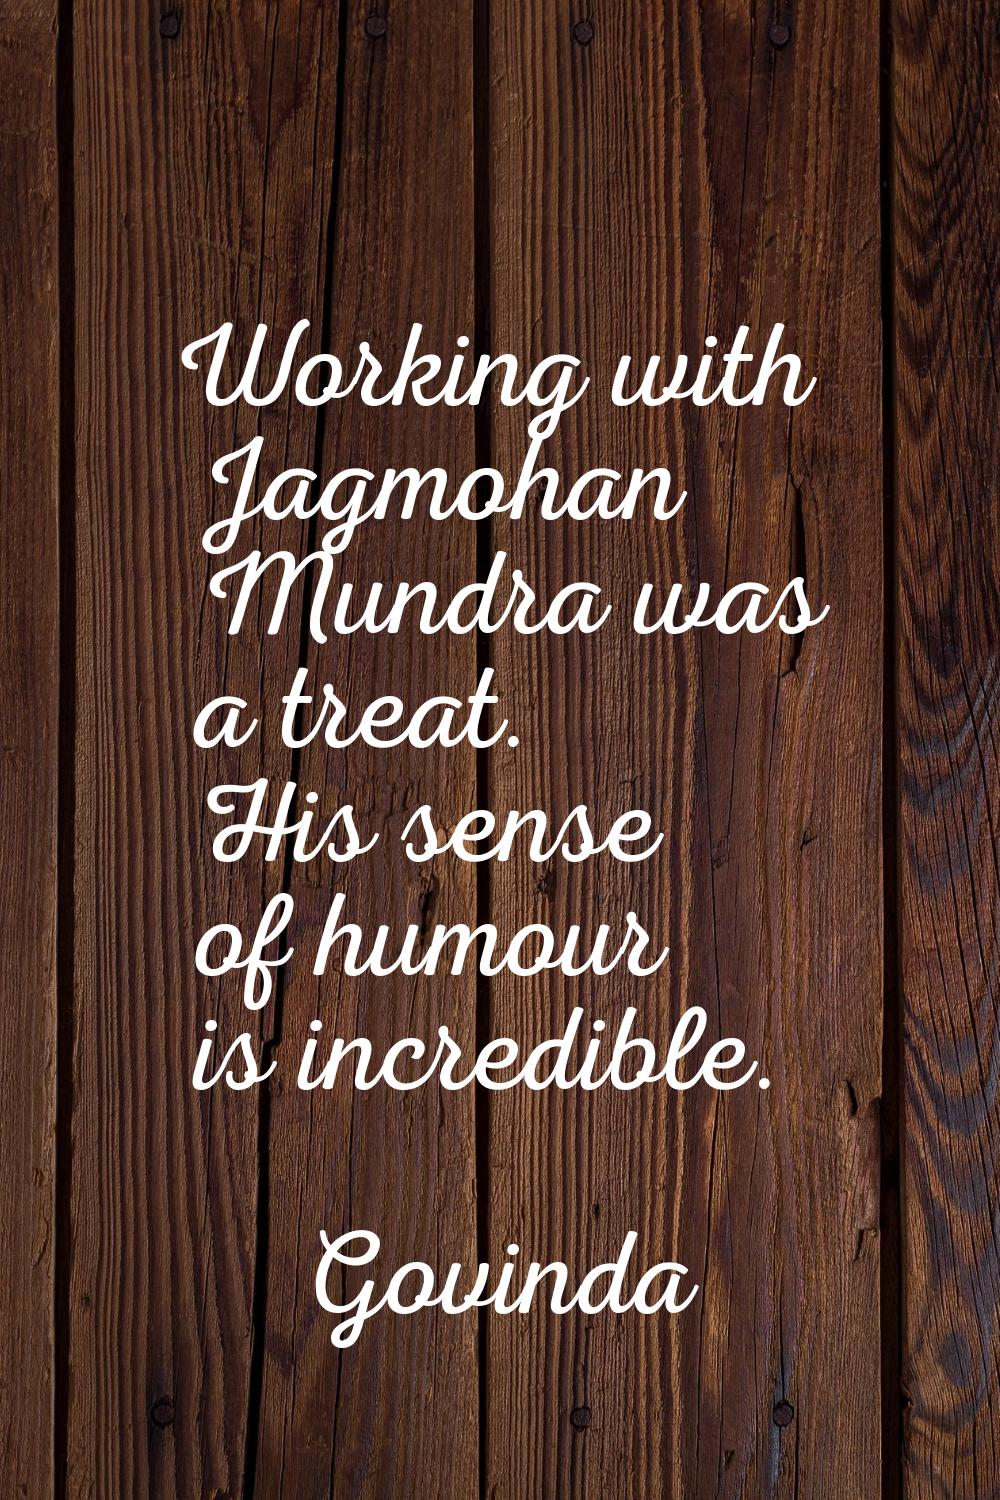 Working with Jagmohan Mundra was a treat. His sense of humour is incredible.